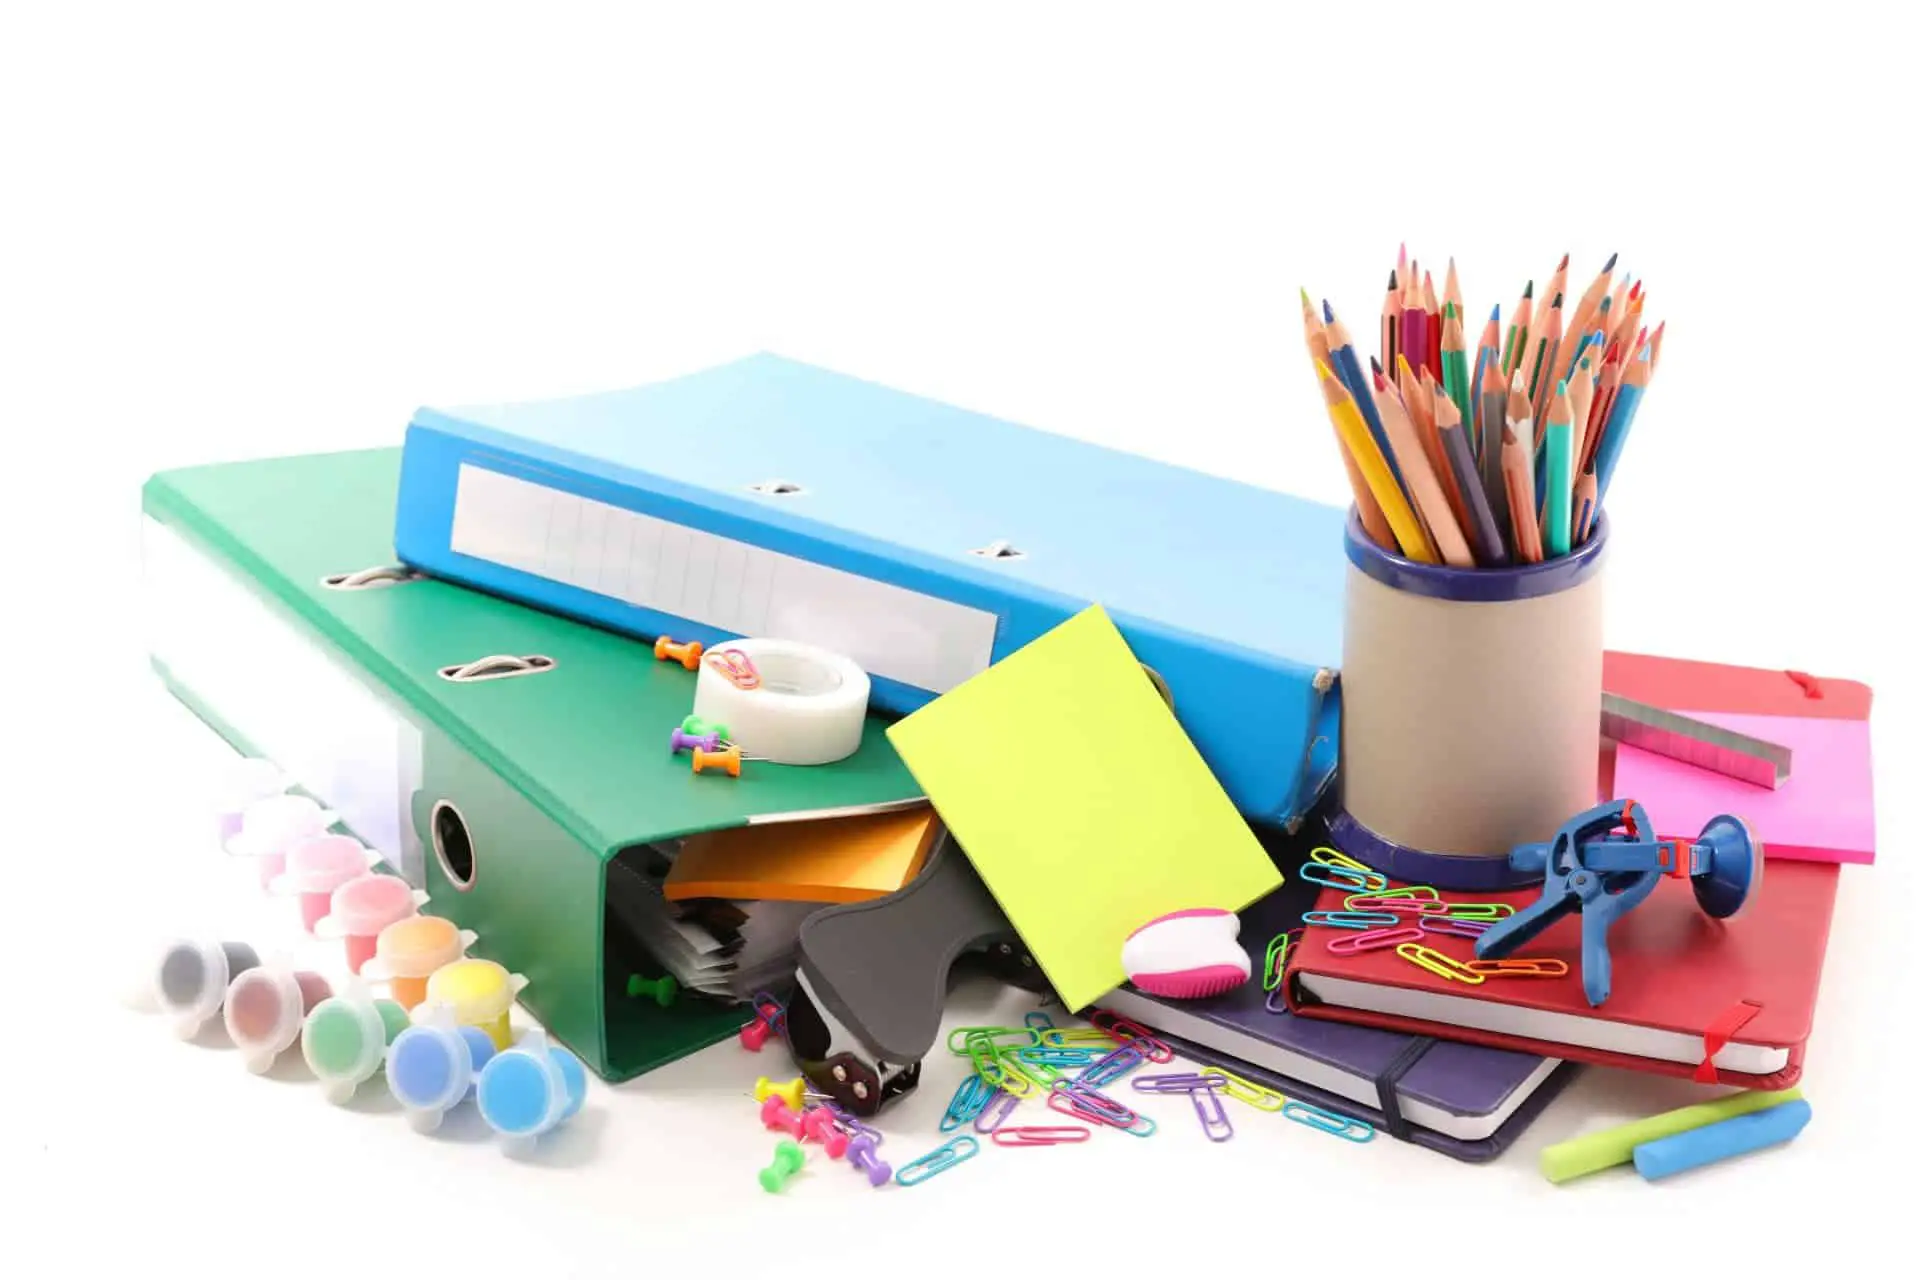 school supplies, pens, pencils and other stationary items